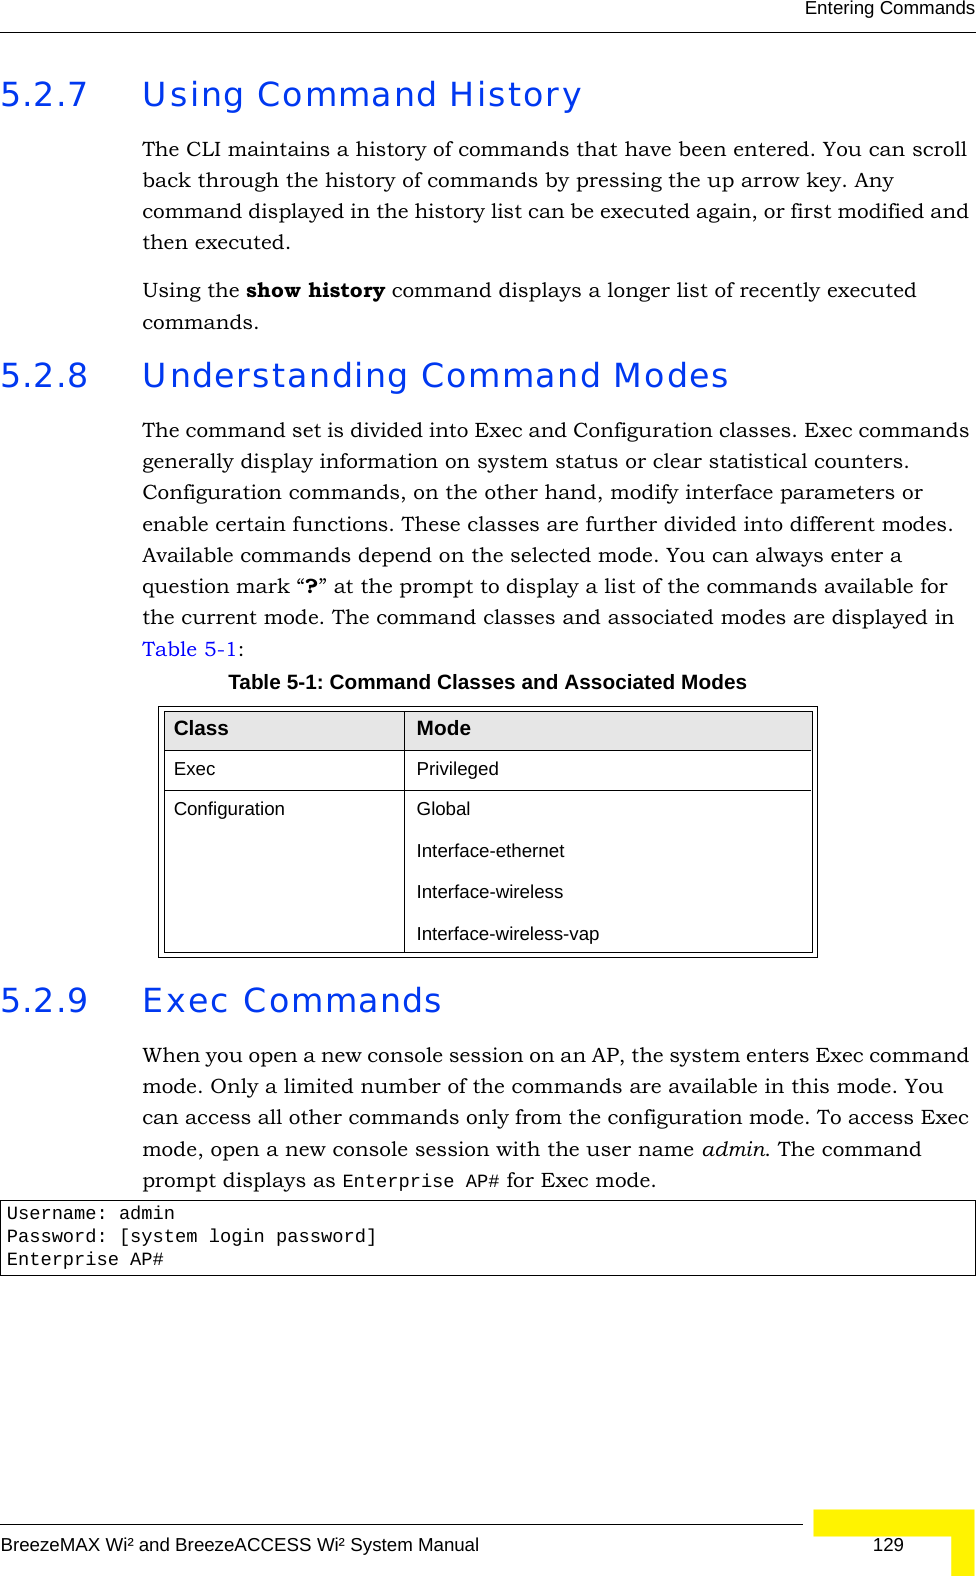 Entering CommandsBreezeMAX Wi² and BreezeACCESS Wi² System Manual  1295.2.7 Using Command HistoryThe CLI maintains a history of commands that have been entered. You can scroll back through the history of commands by pressing the up arrow key. Any command displayed in the history list can be executed again, or first modified and then executed. Using the show history command displays a longer list of recently executed commands. 5.2.8 Understanding Command ModesThe command set is divided into Exec and Configuration classes. Exec commands generally display information on system status or clear statistical counters. Configuration commands, on the other hand, modify interface parameters or enable certain functions. These classes are further divided into different modes. Available commands depend on the selected mode. You can always enter a question mark “?” at the prompt to display a list of the commands available for the current mode. The command classes and associated modes are displayed in Table 5-1:5.2.9 Exec CommandsWhen you open a new console session on an AP, the system enters Exec command mode. Only a limited number of the commands are available in this mode. You can access all other commands only from the configuration mode. To access Exec mode, open a new console session with the user name admin. The command prompt displays as Enterprise AP# for Exec mode. Table 5-1: Command Classes and Associated ModesClass ModeExec PrivilegedConfiguration GlobalInterface-ethernetInterface-wirelessInterface-wireless-vapUsername: adminPassword: [system login password]Enterprise AP#